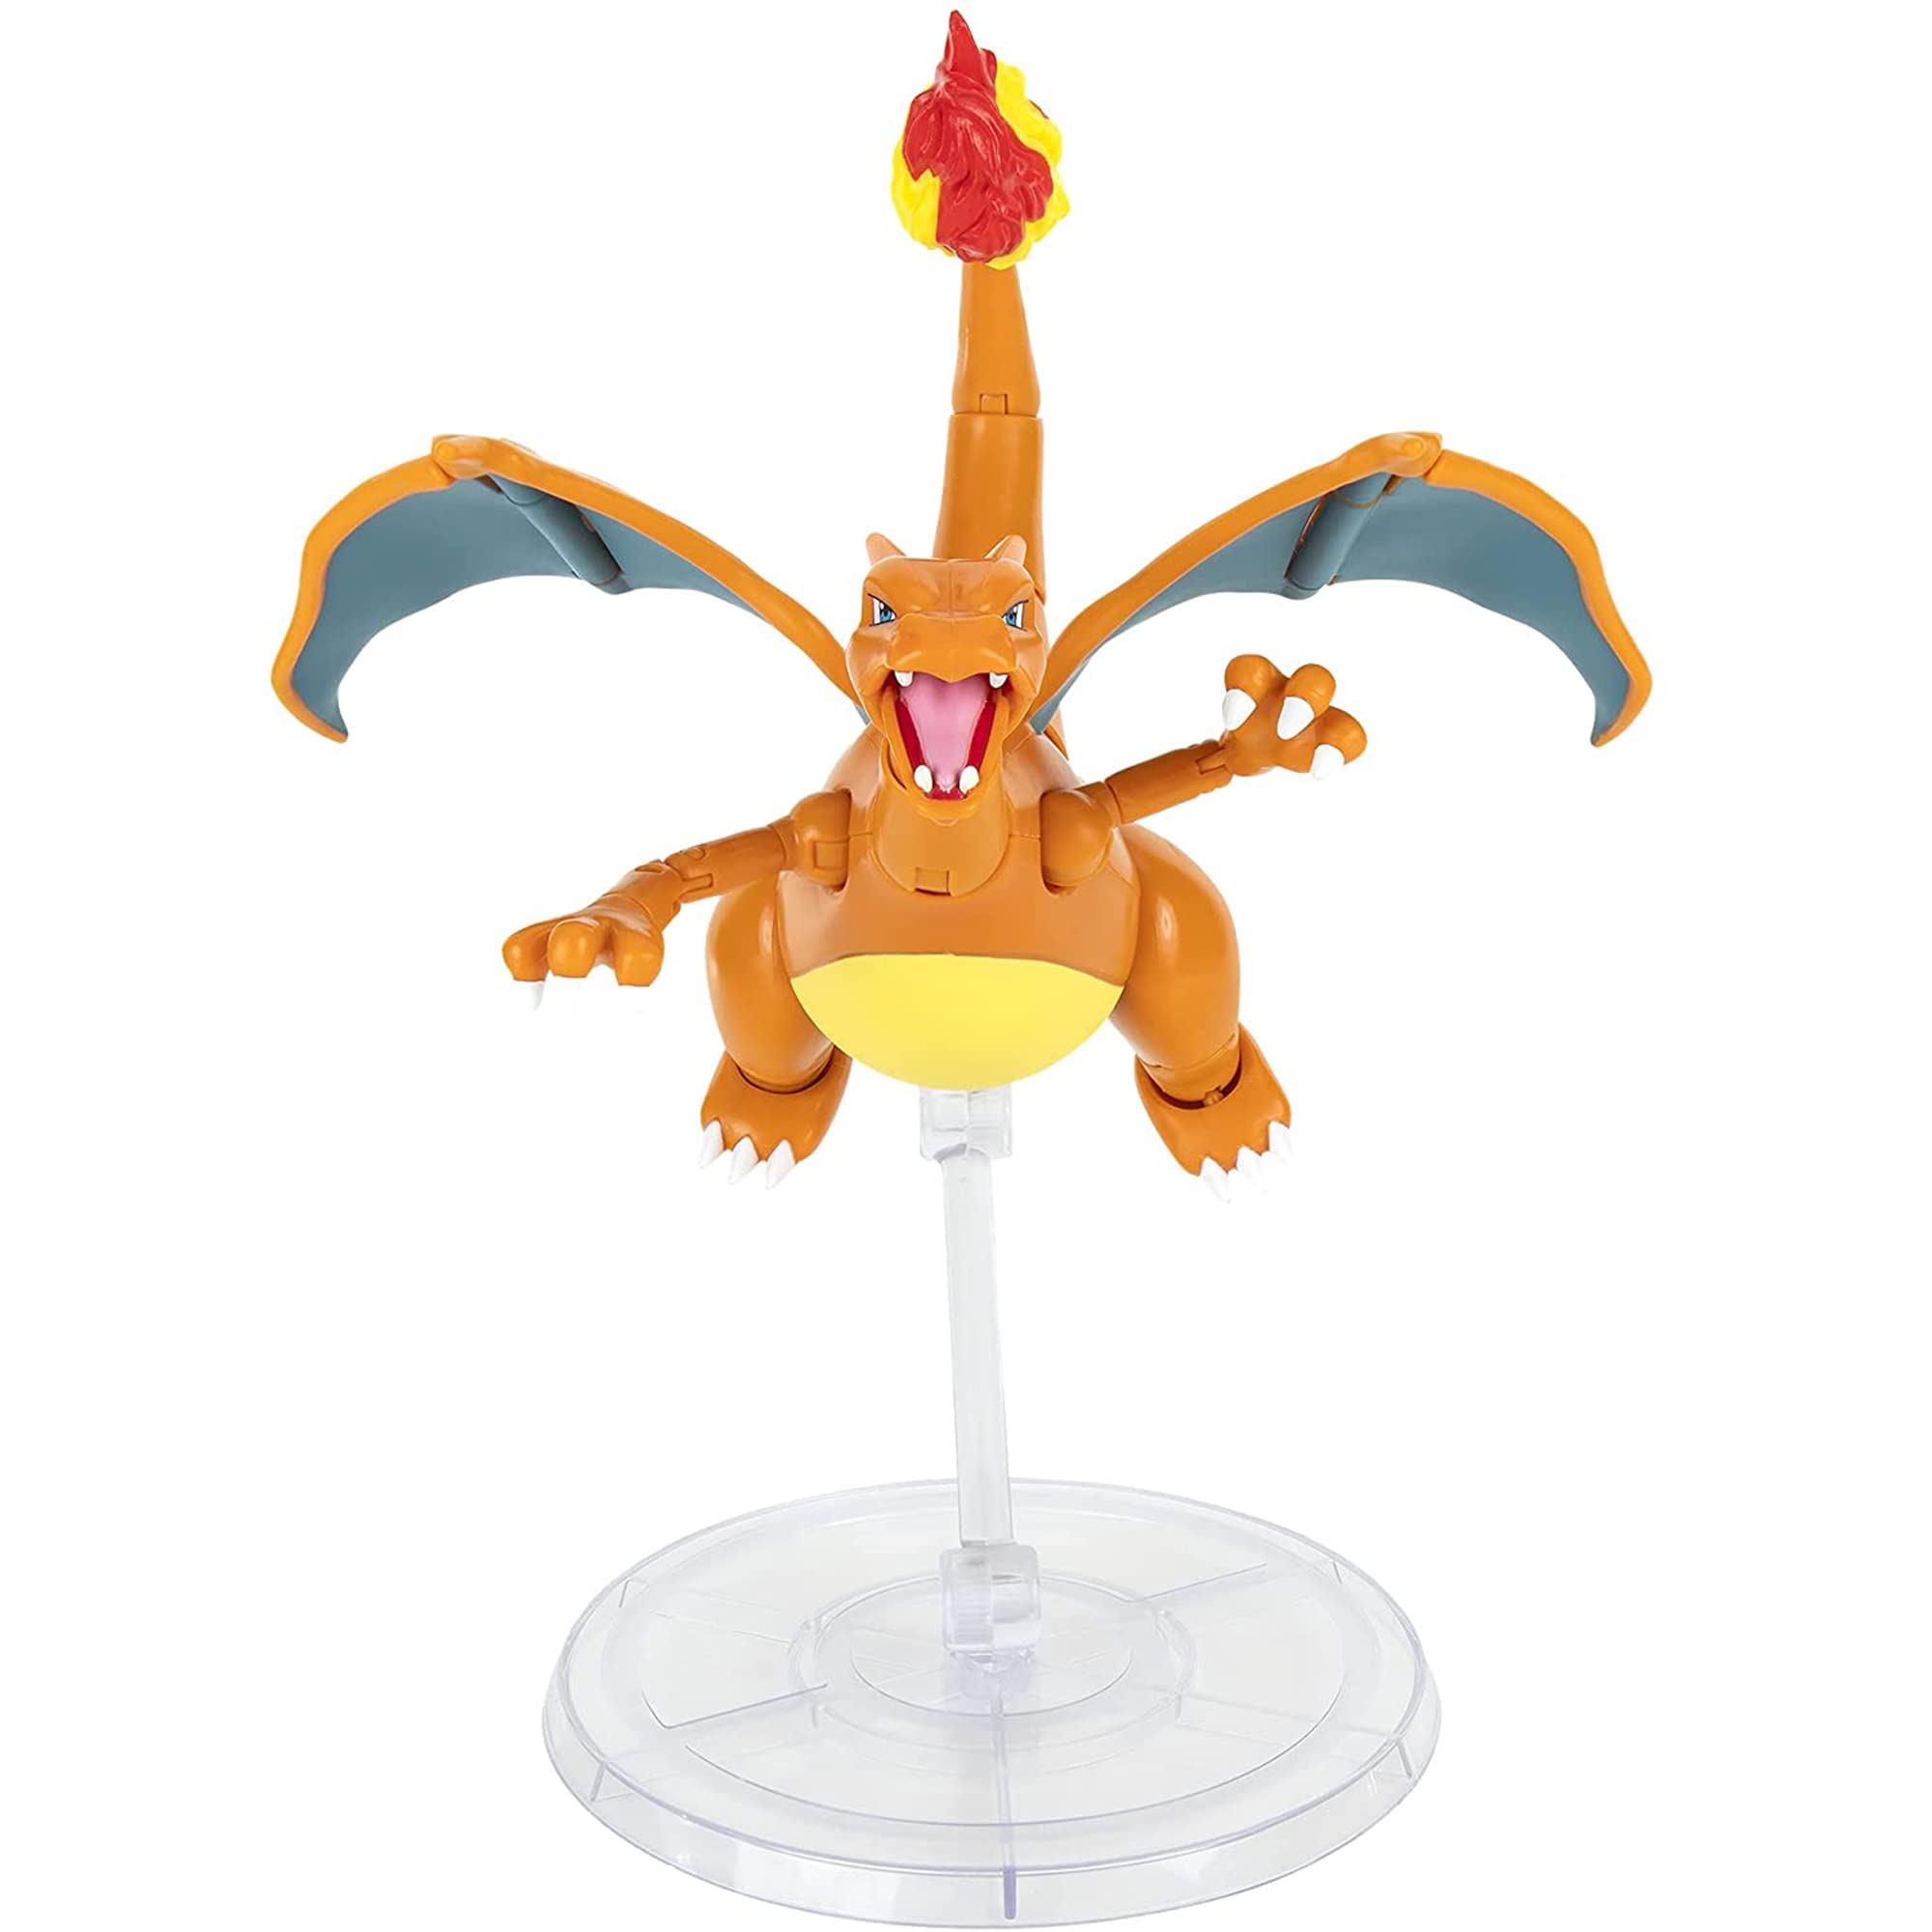 Pokemon Charizard, Super-Articulated 6-Inch Figure - Collect Your Favorite Figures - Toys for Kids and Pokémon Fans